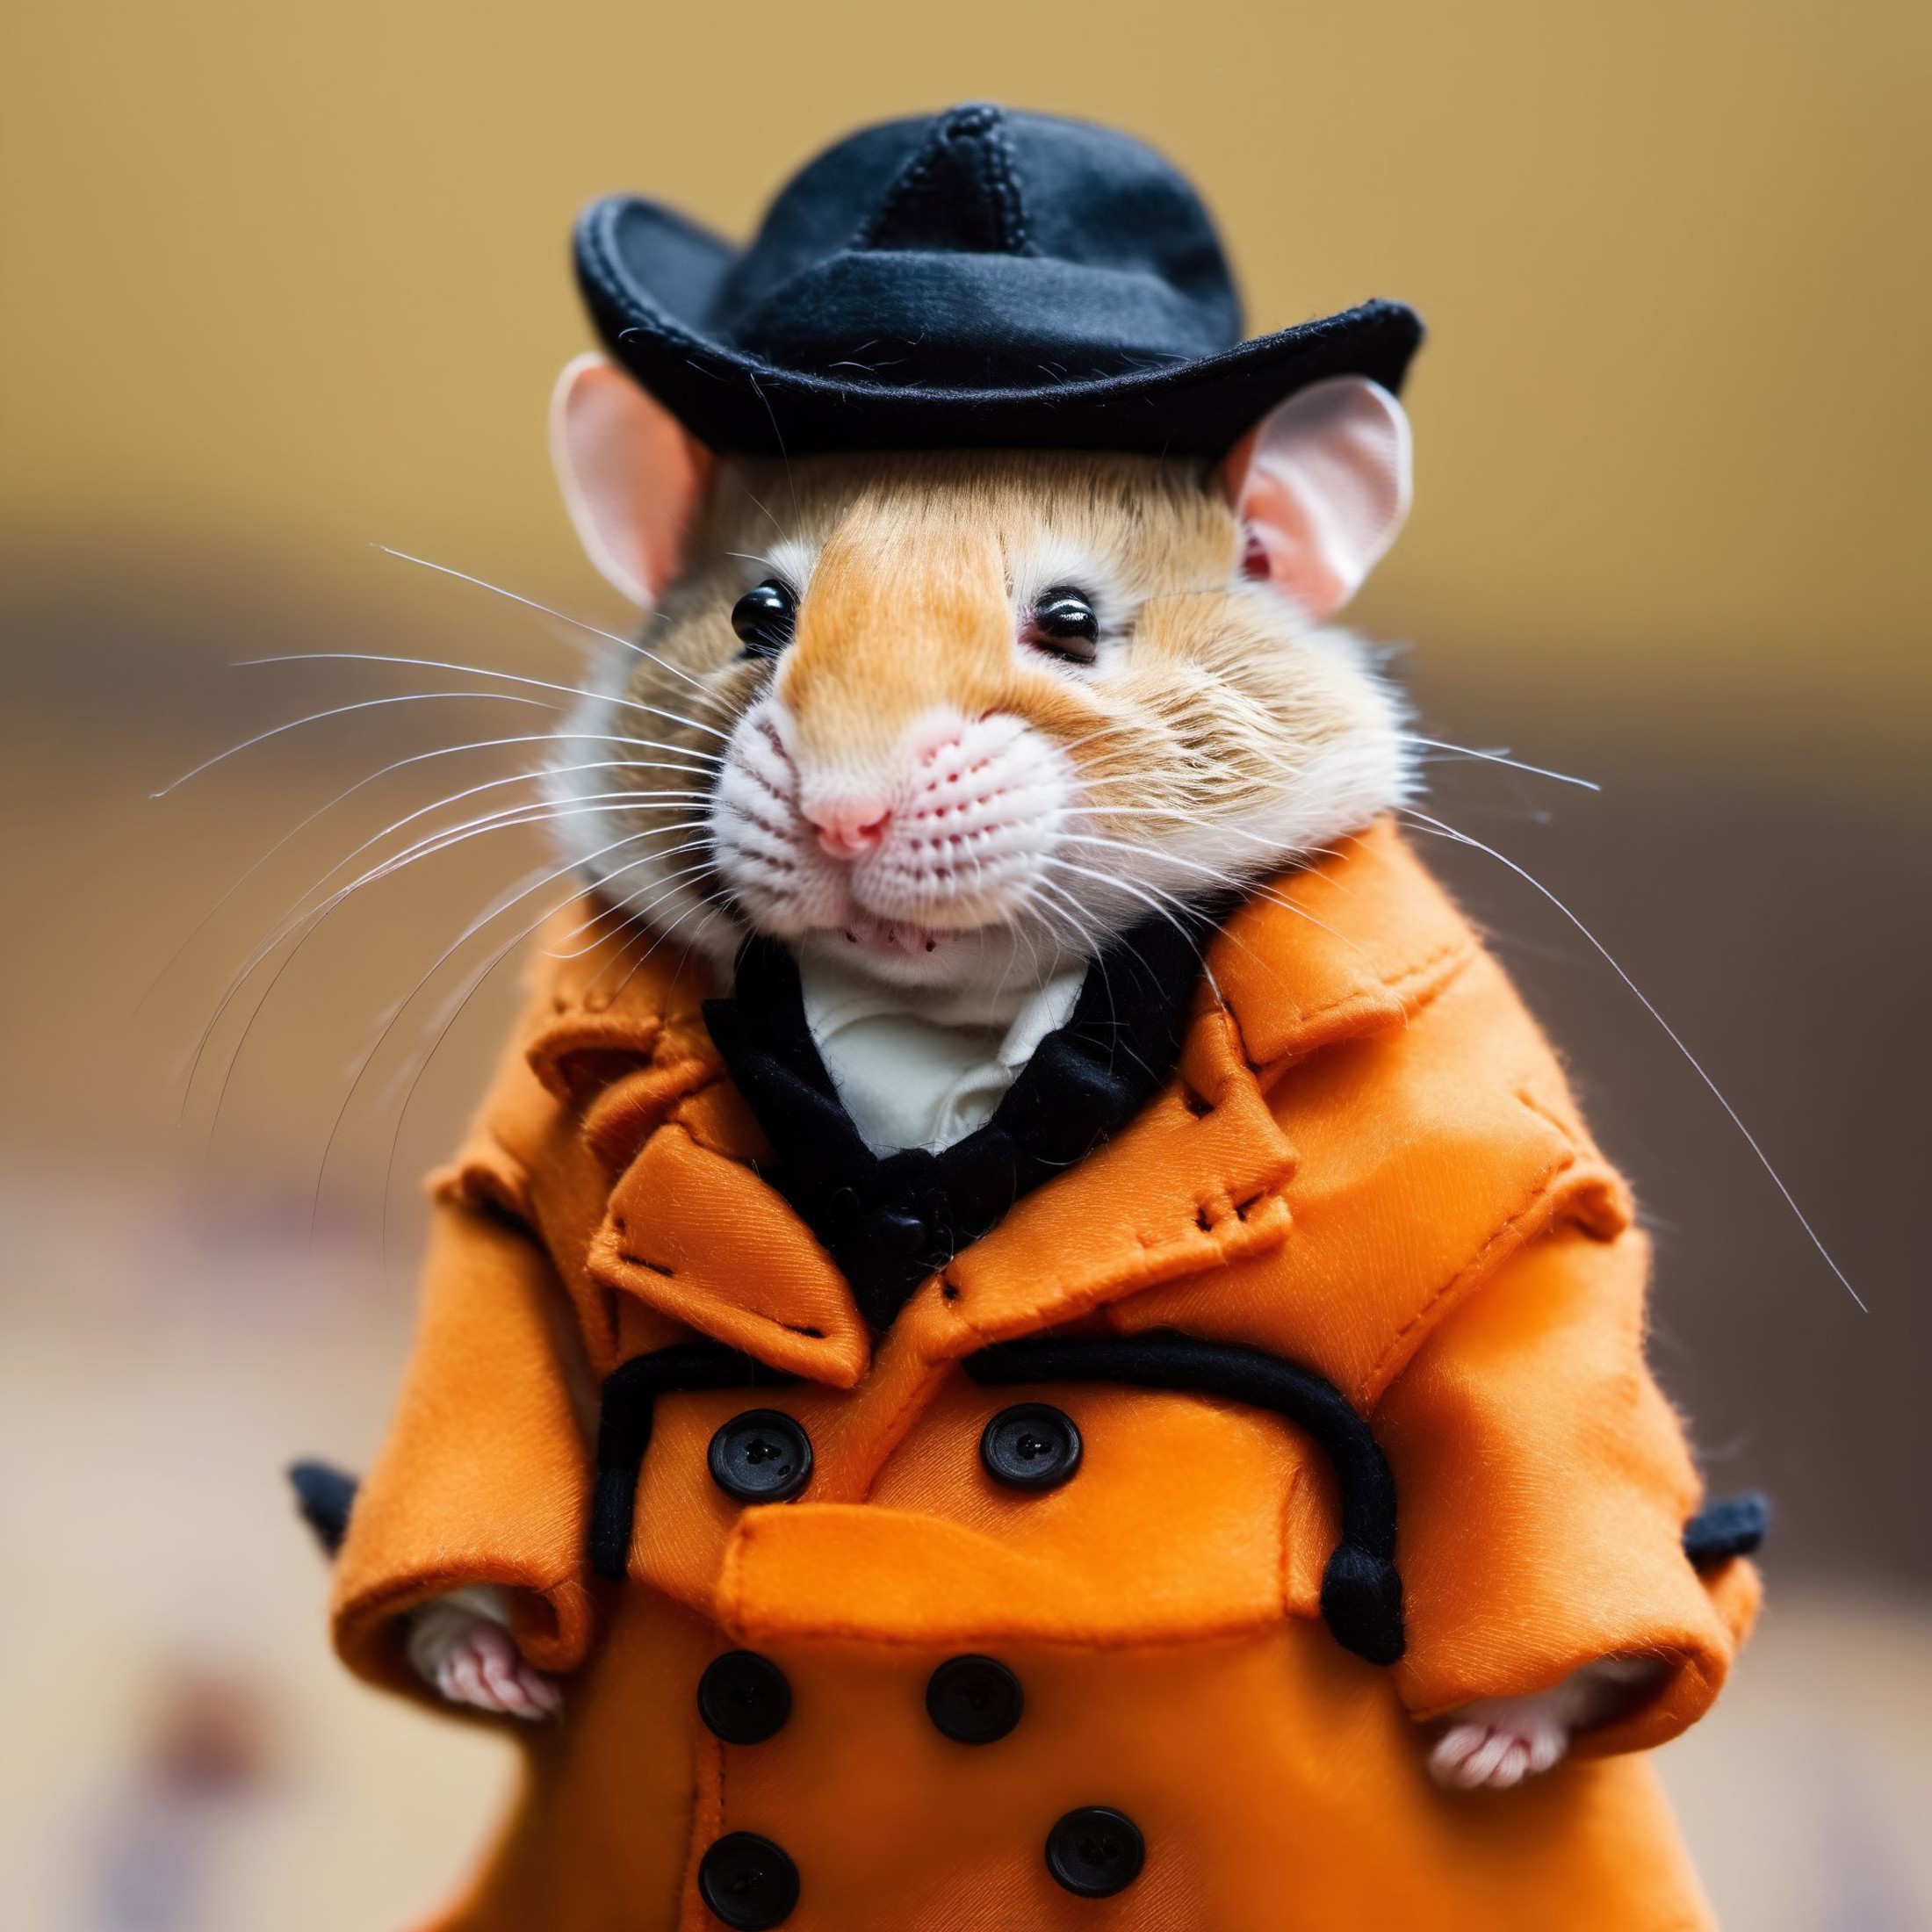 A mouse in an orange trench coat and a black hat, <lora:[XL]rat:1>